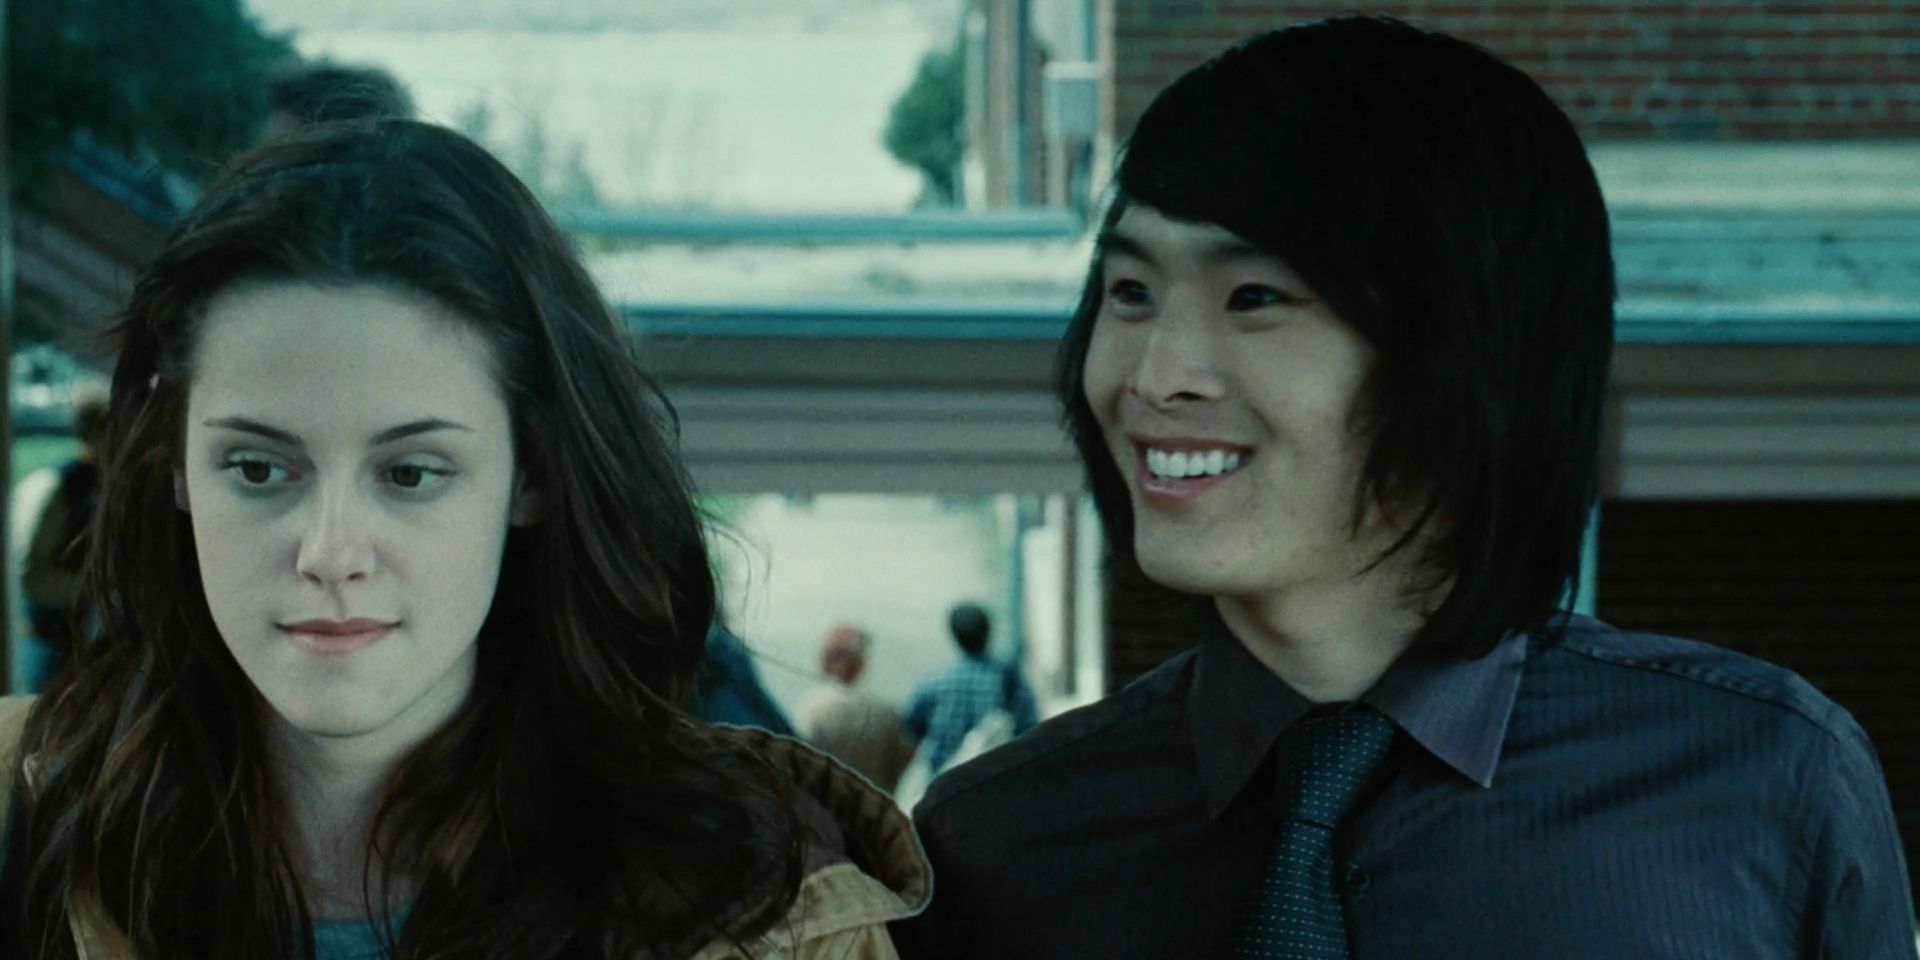 justin chon and kristen stewart as eric and bella in twilight